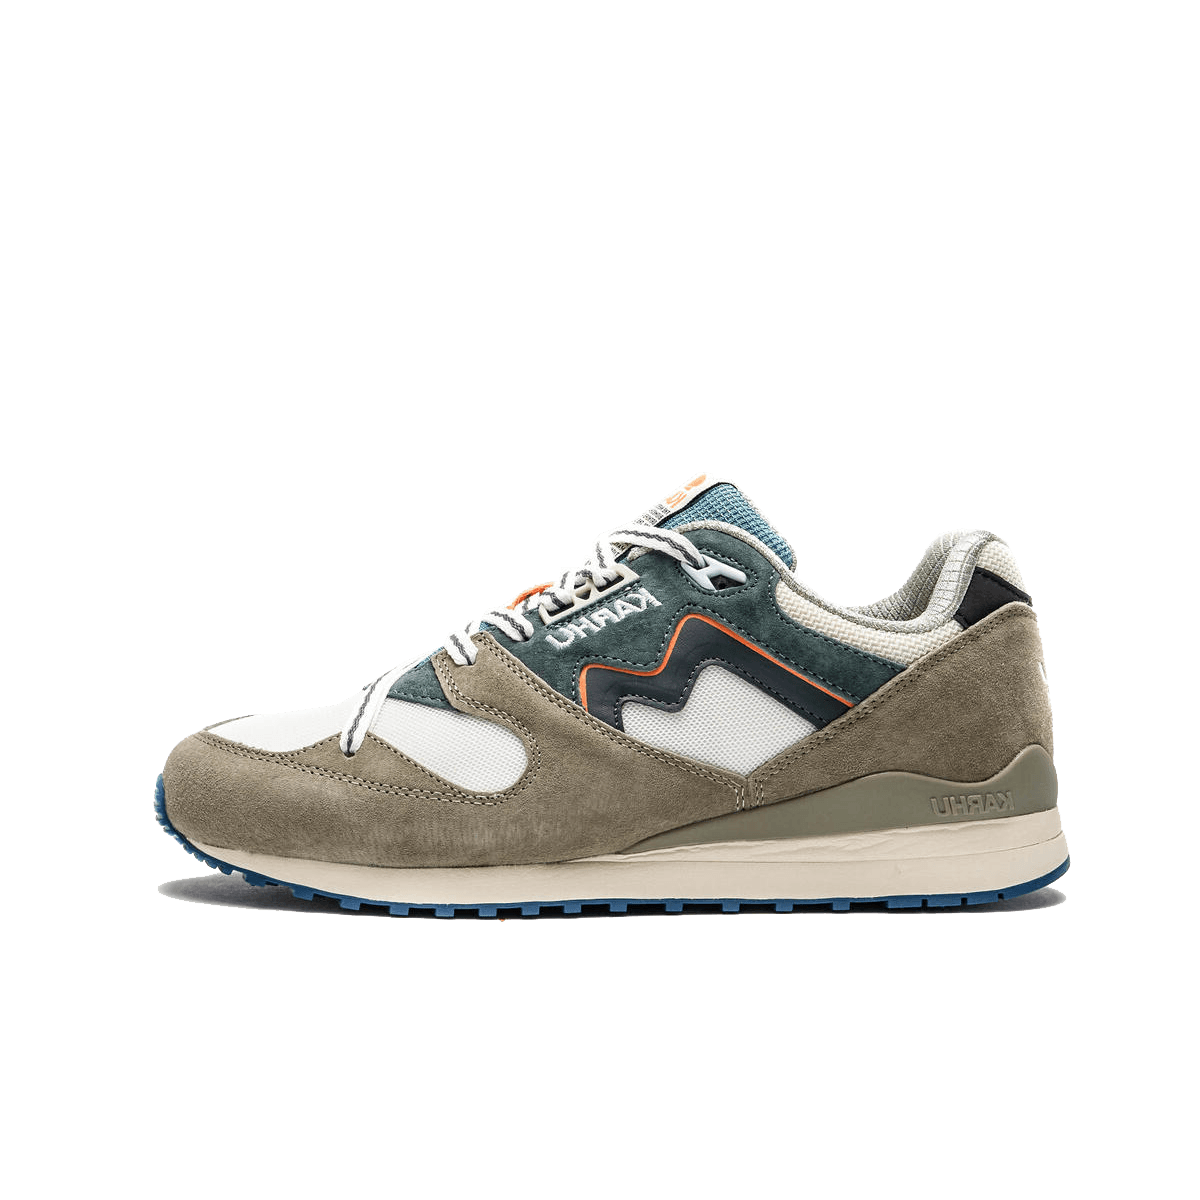 Karhu Synchron Classic 'The Forest Rules' F802675